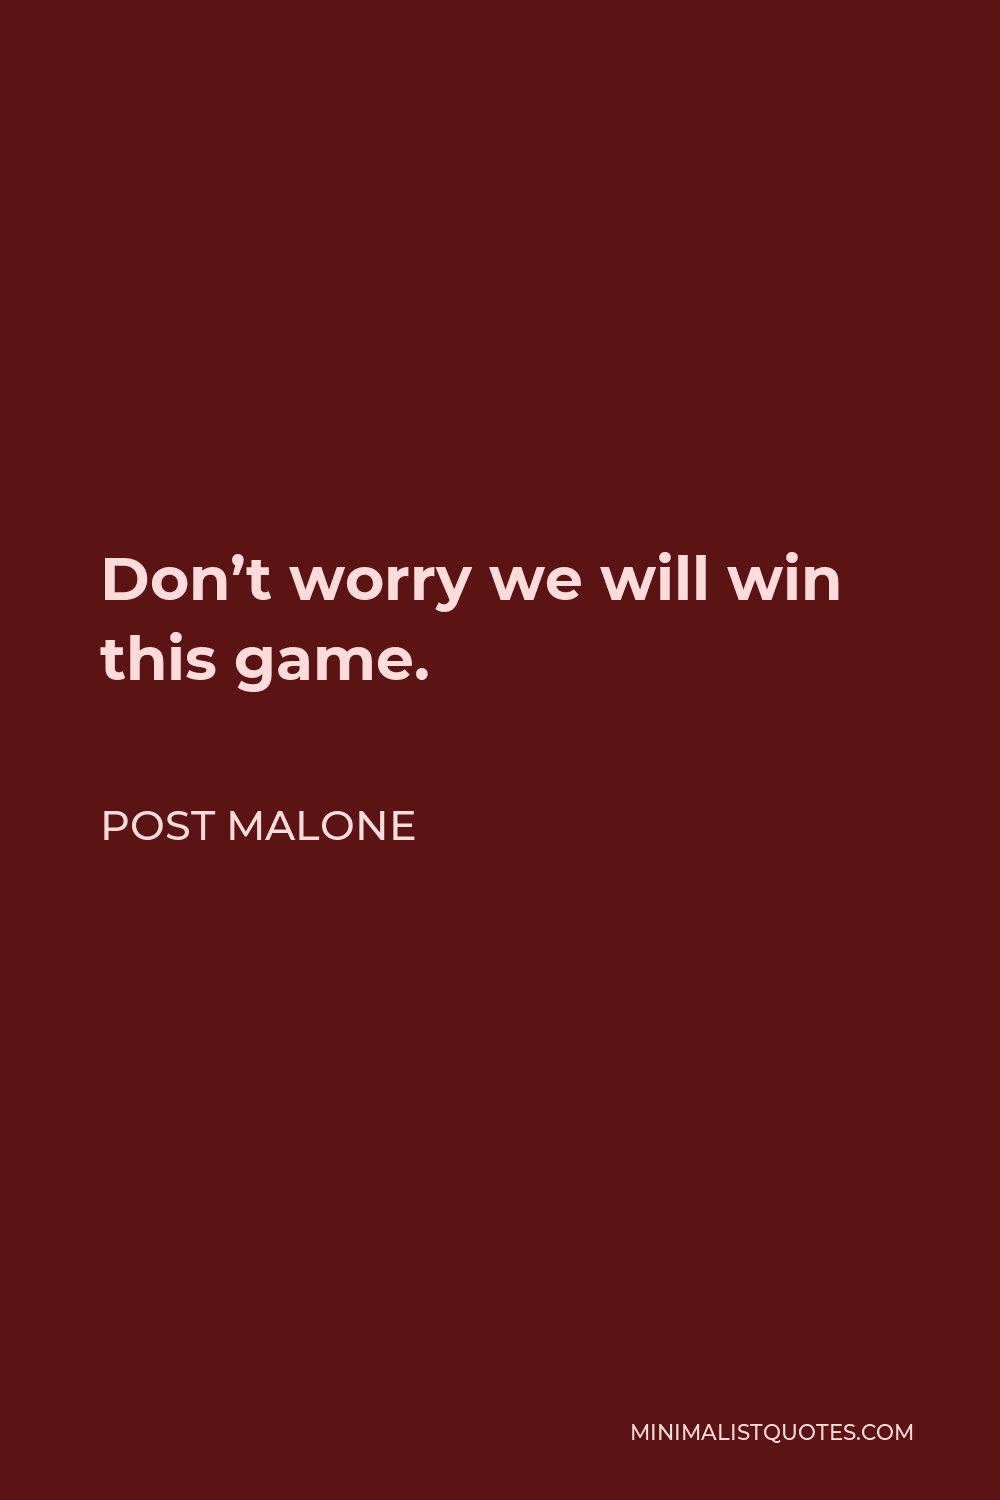 Post Malone Quote: Don't worry we will win this game.